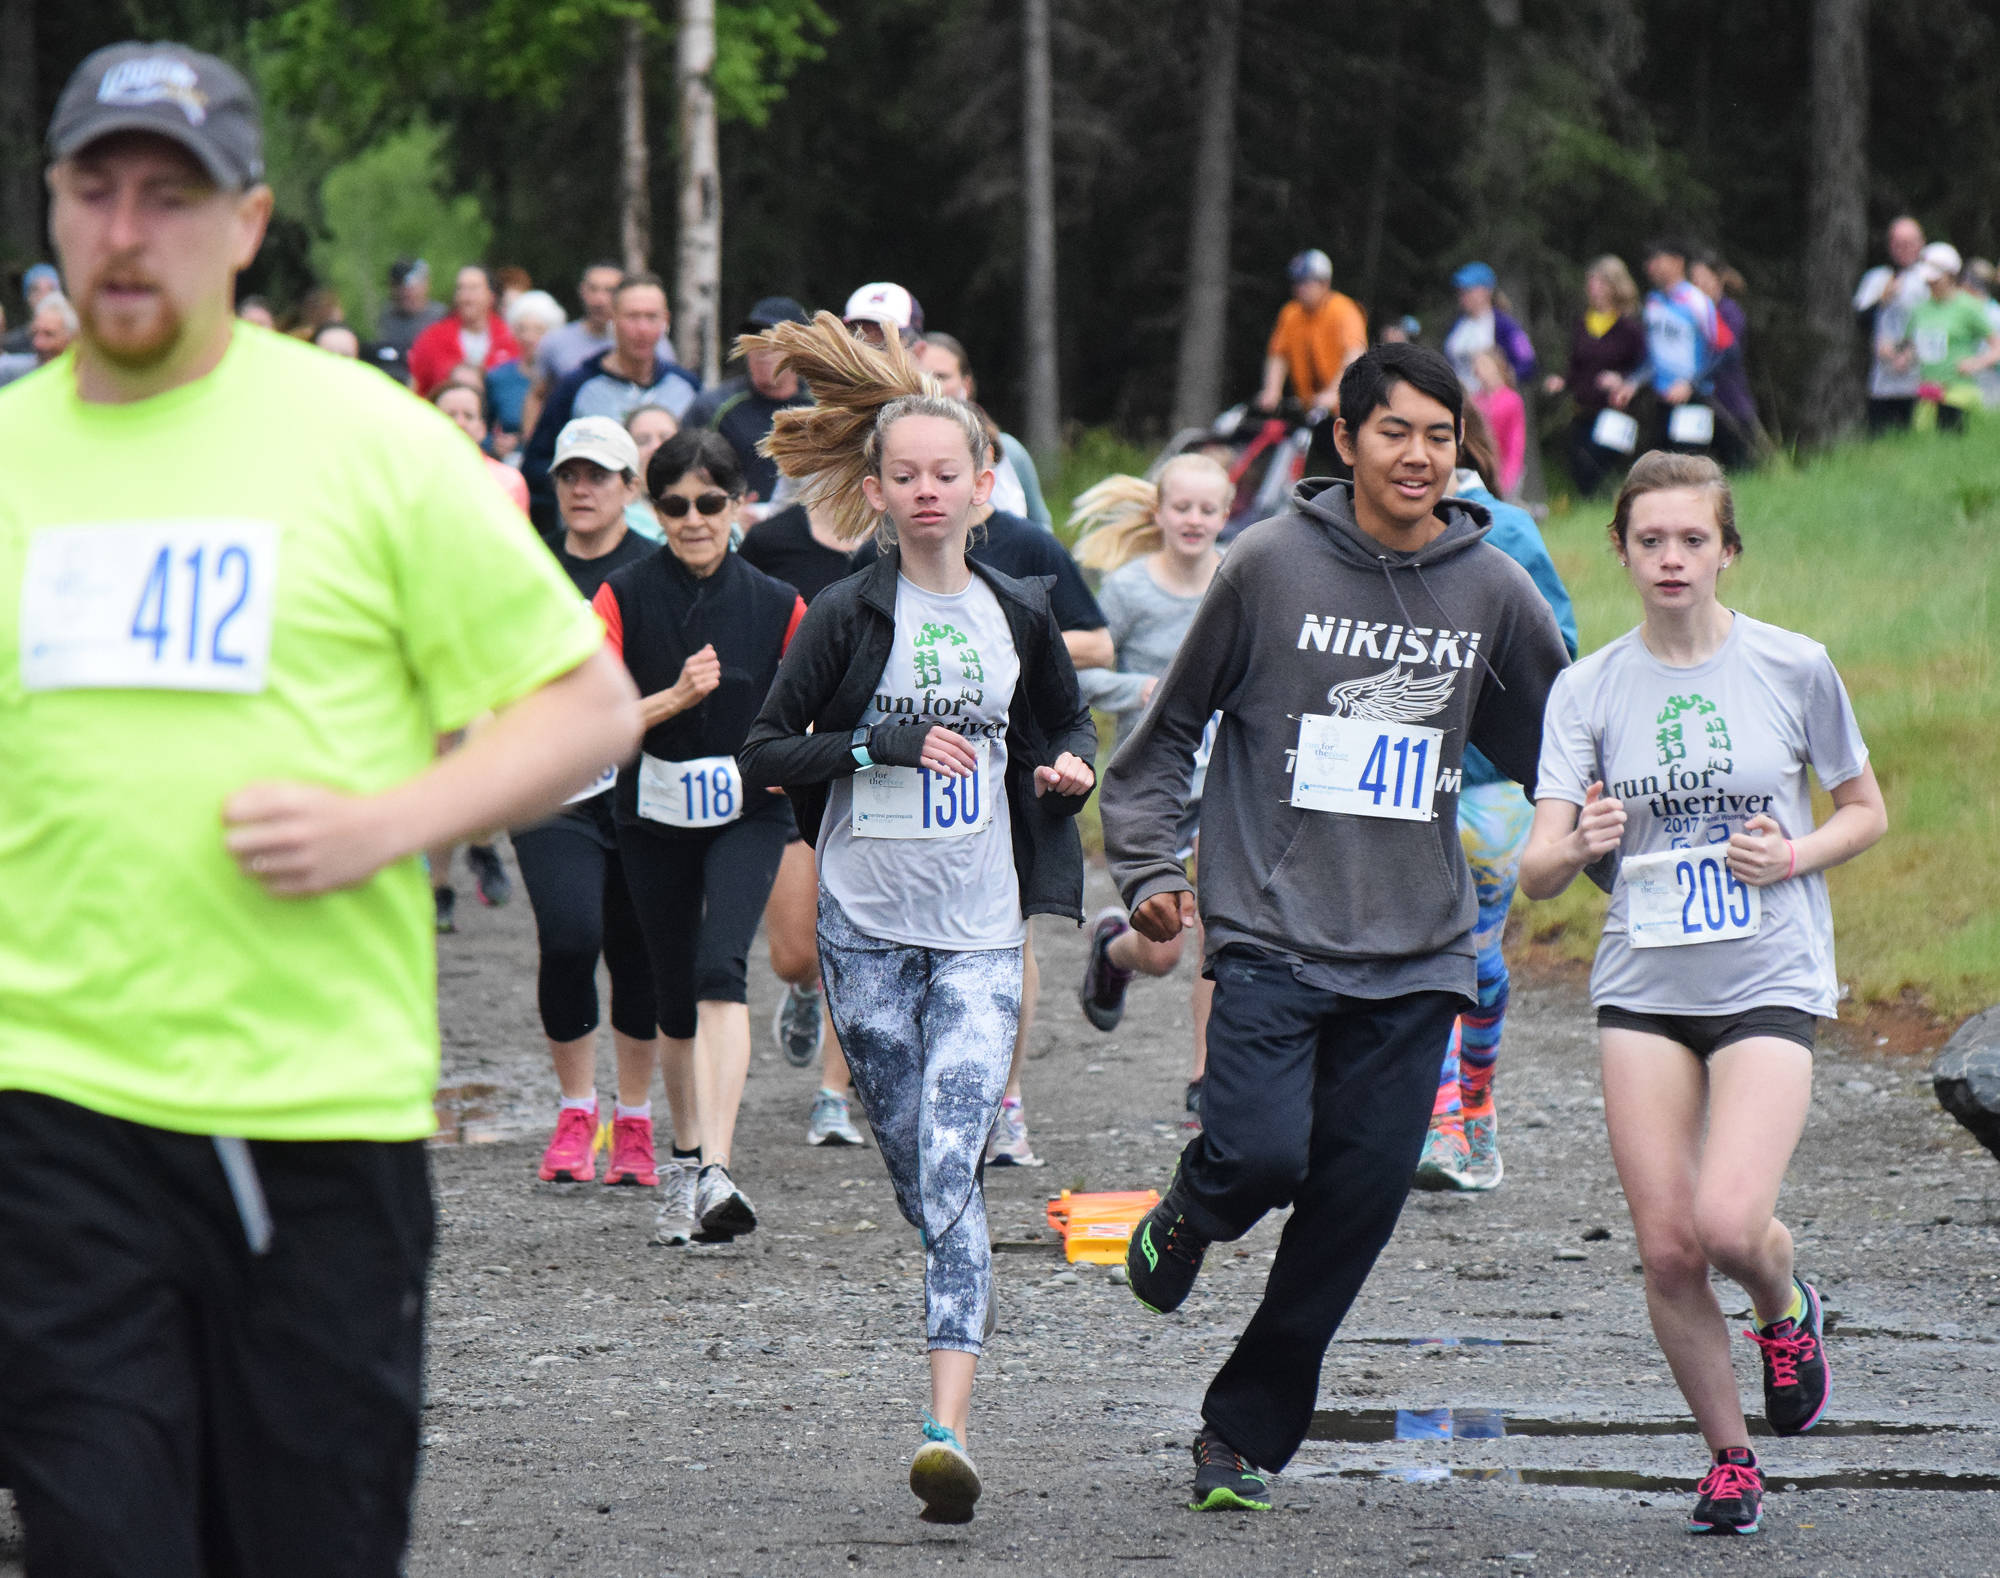 The field of runners in the Run for the River 5-kilometer race race out onto the course Saturday morning in Soldotna. (Photo by Joey Klecka/Peninsula Clarion)